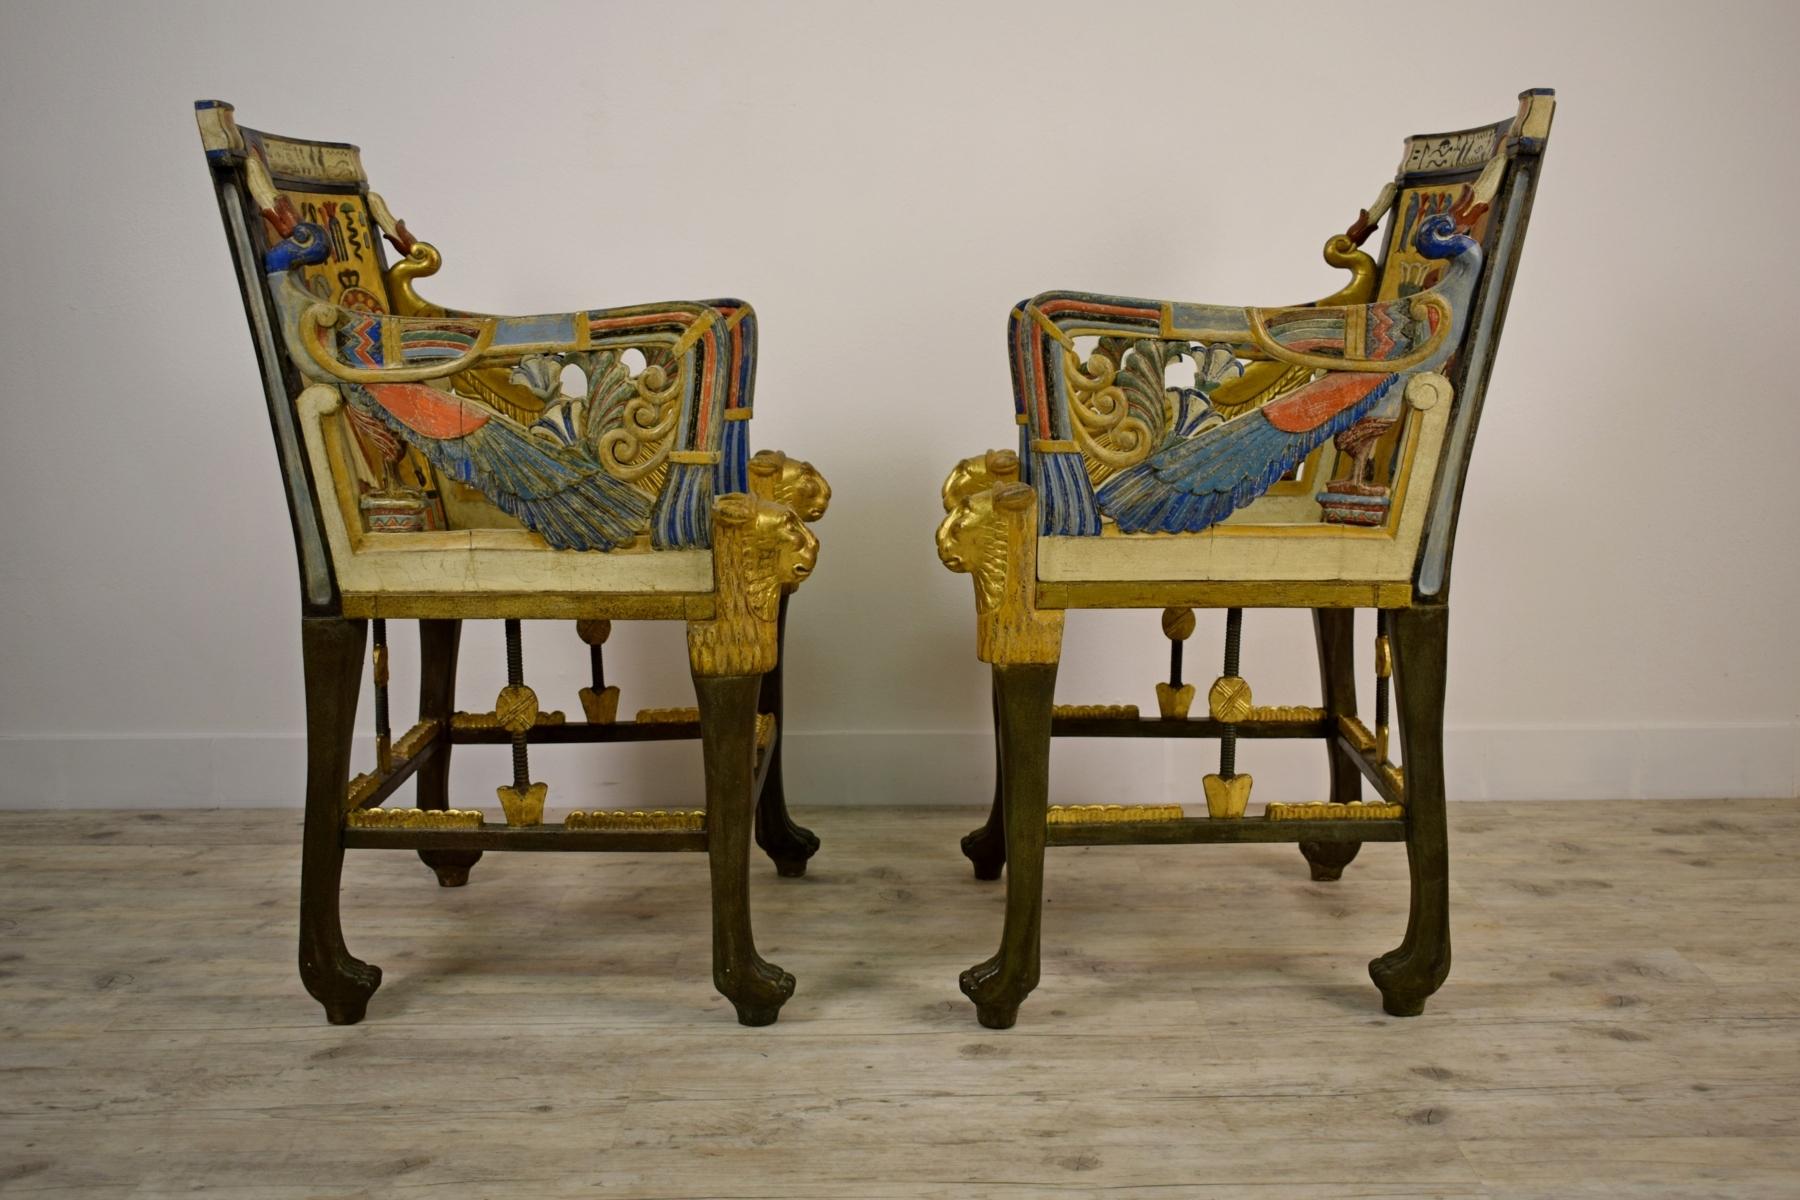 Hardwood 20th Century, Pair of Lacquered Giltwood Armchairs in Egyptian Revival Style For Sale